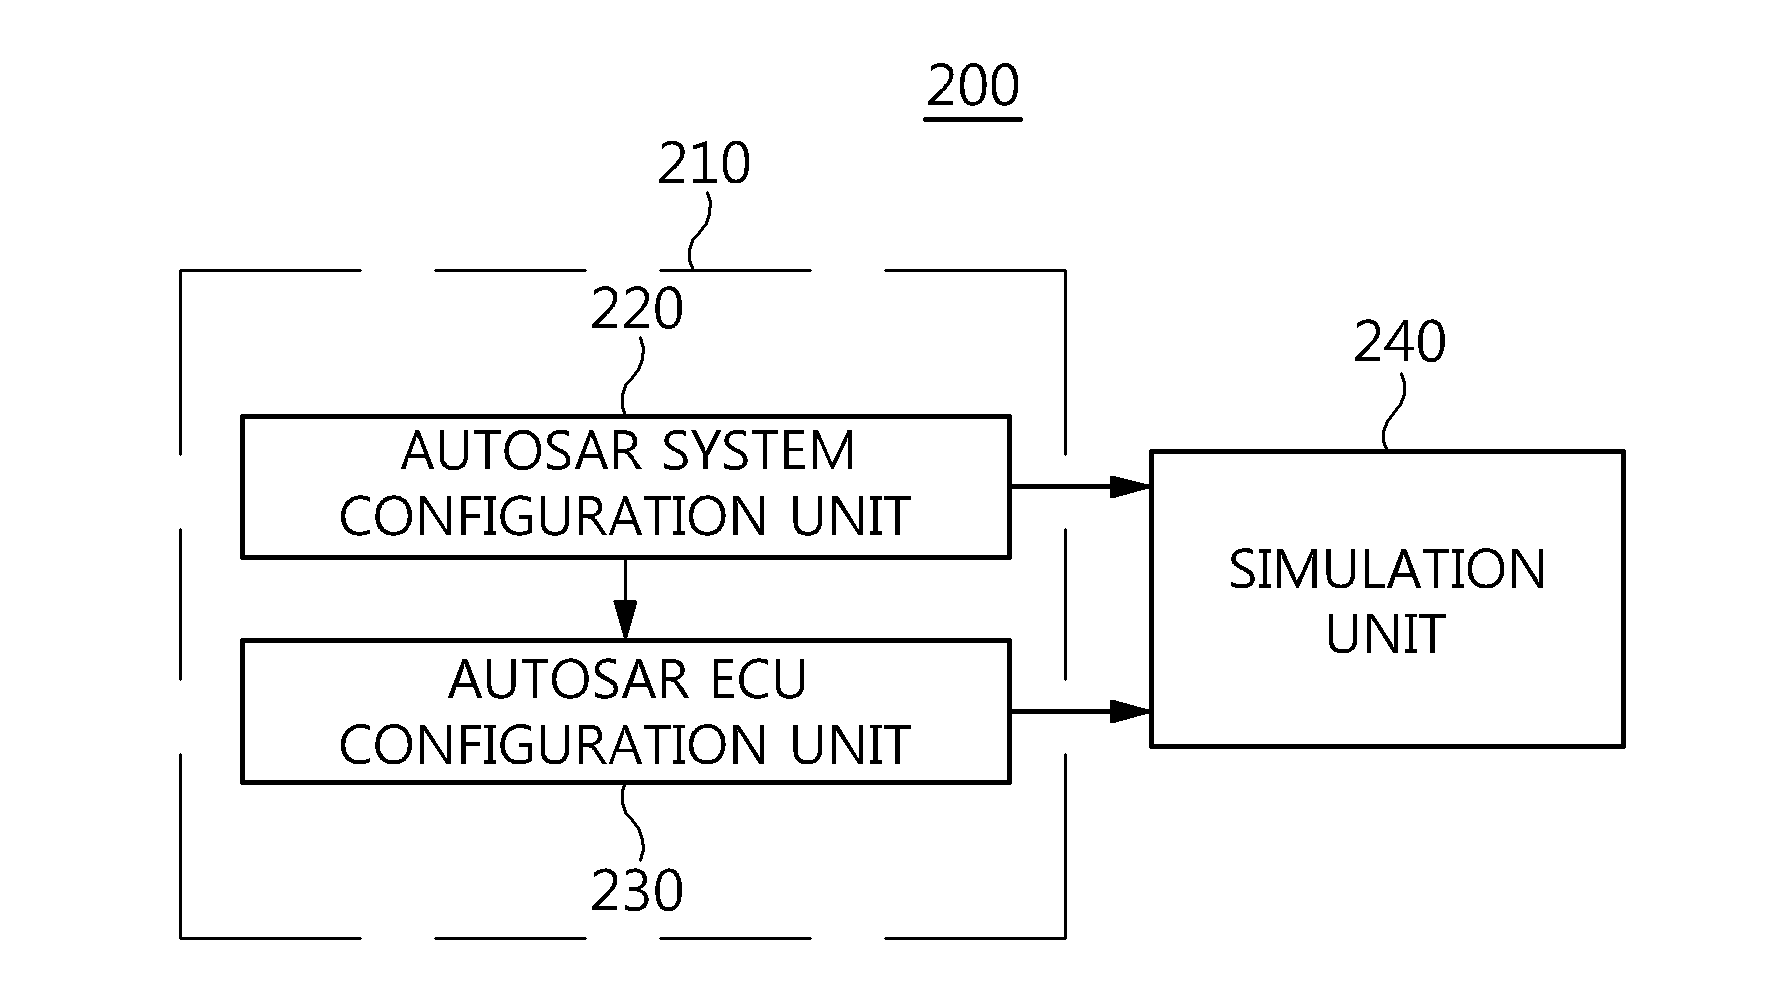 Apparatus and method for verifying interoperability between application software and autosar service